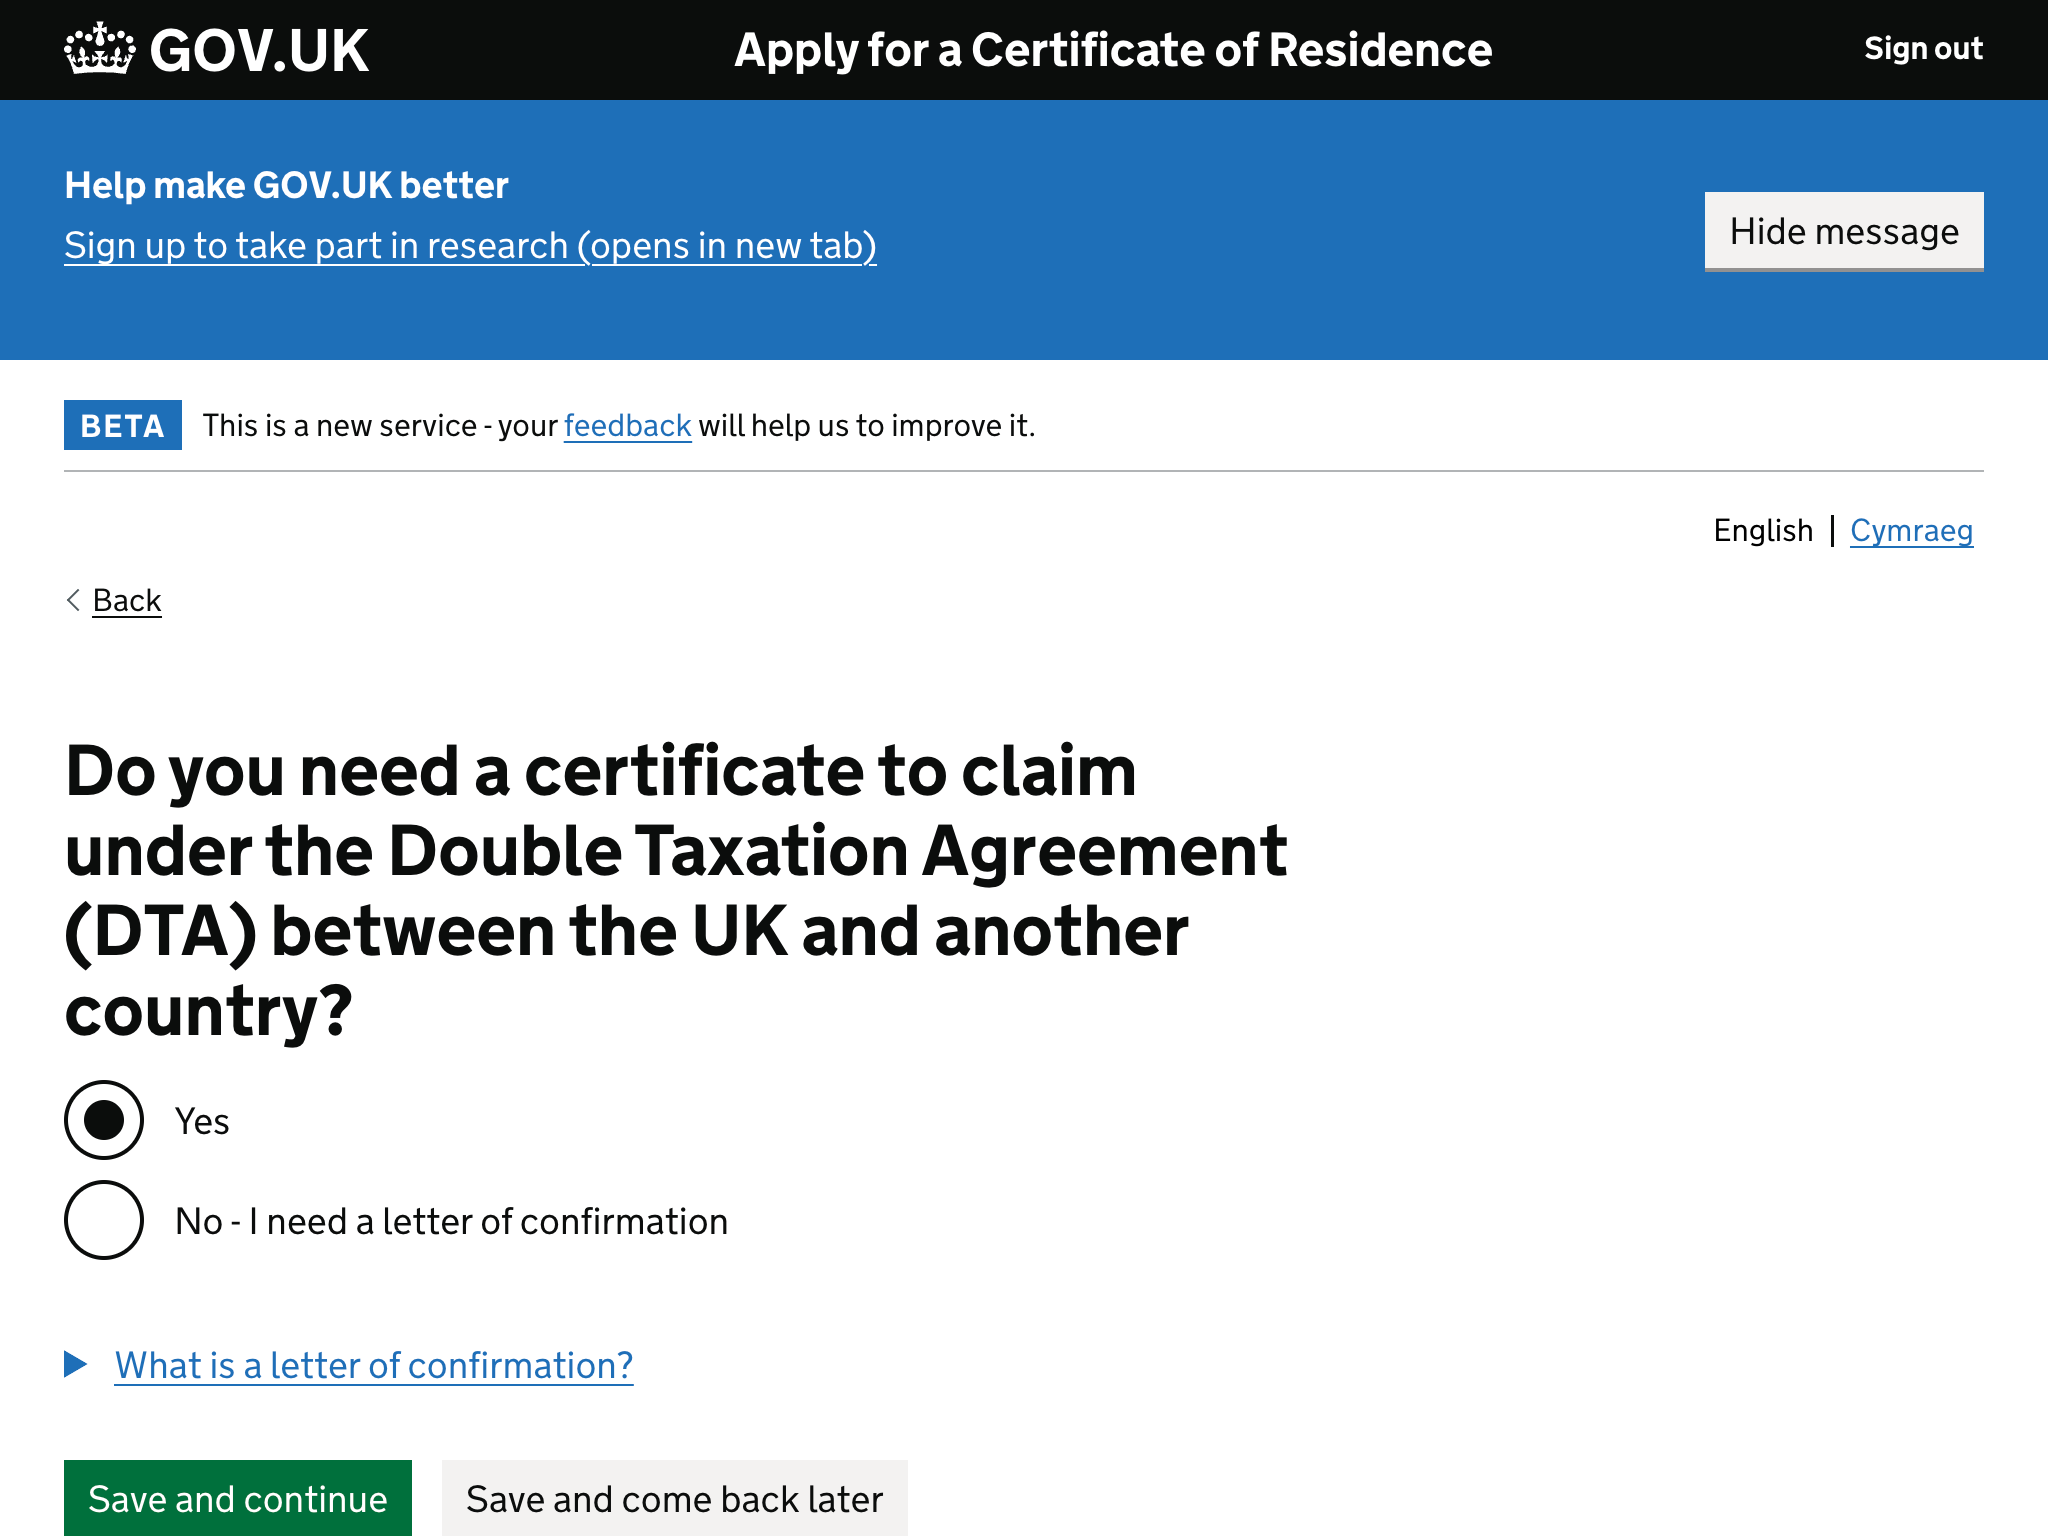 Do you need a certificate to claim under the double taxation agreement (DTA) between the UK and another country?